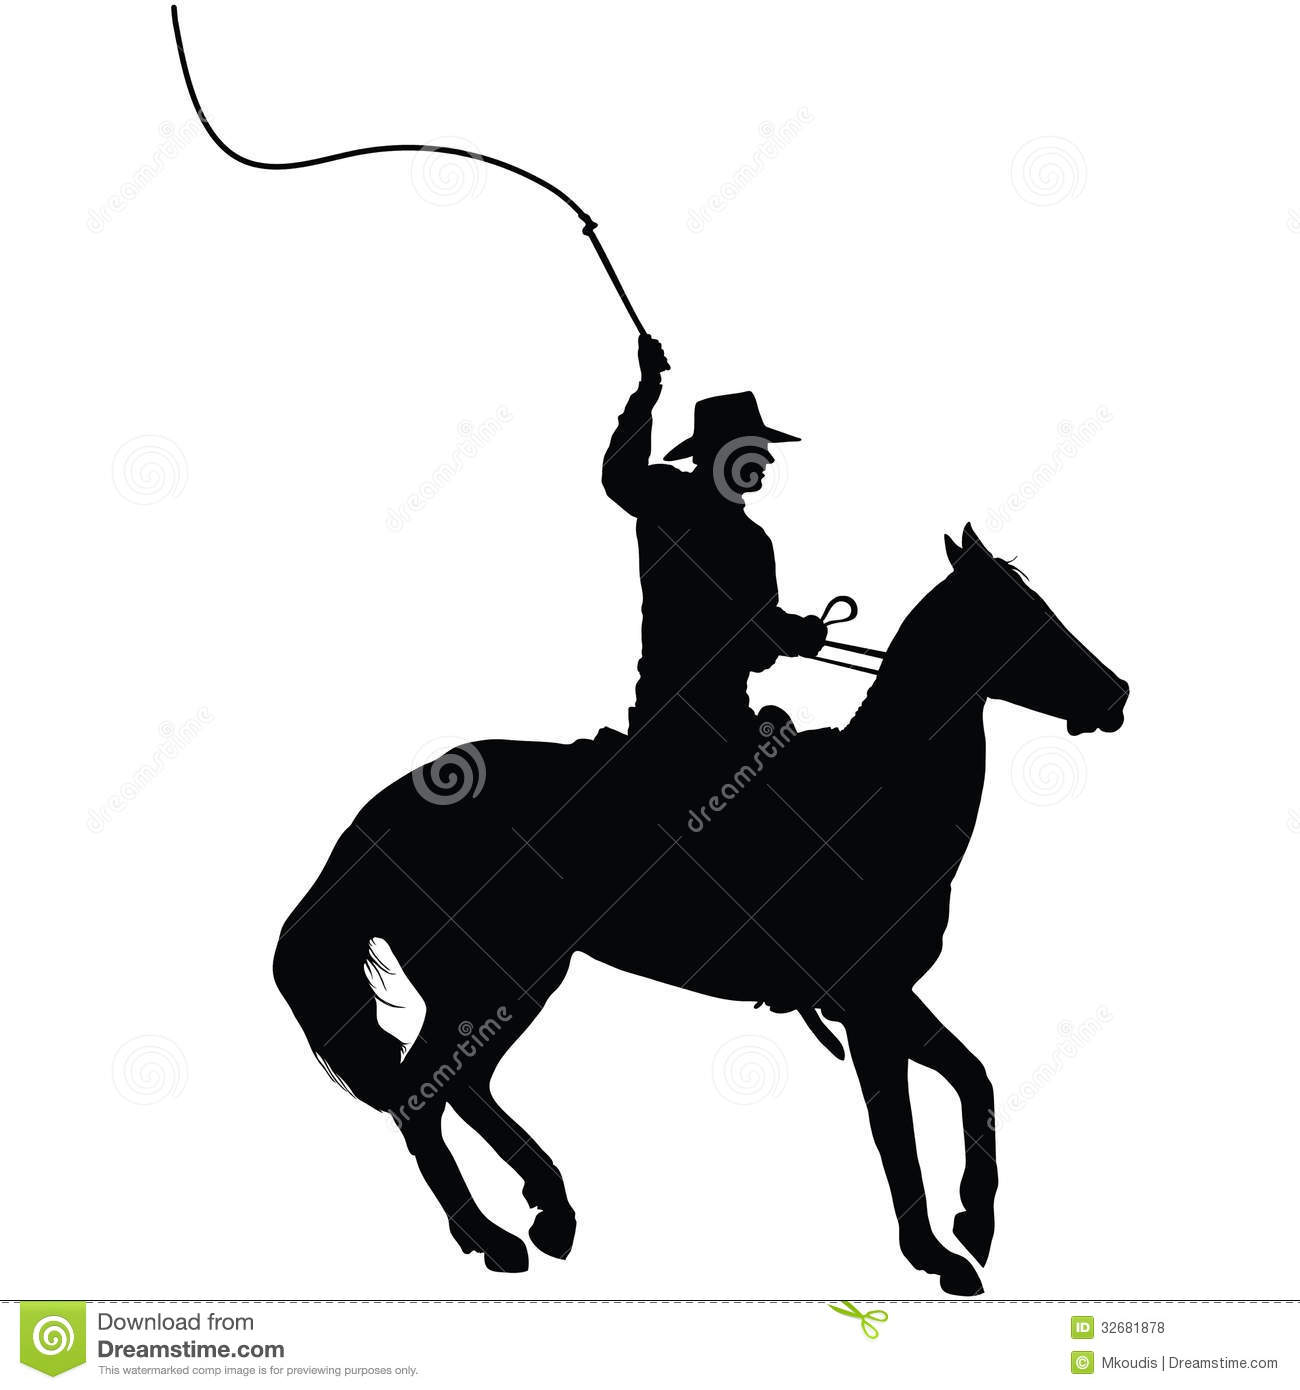 Horseman With Whip Royalty Free Stock Photos   Image  32681878